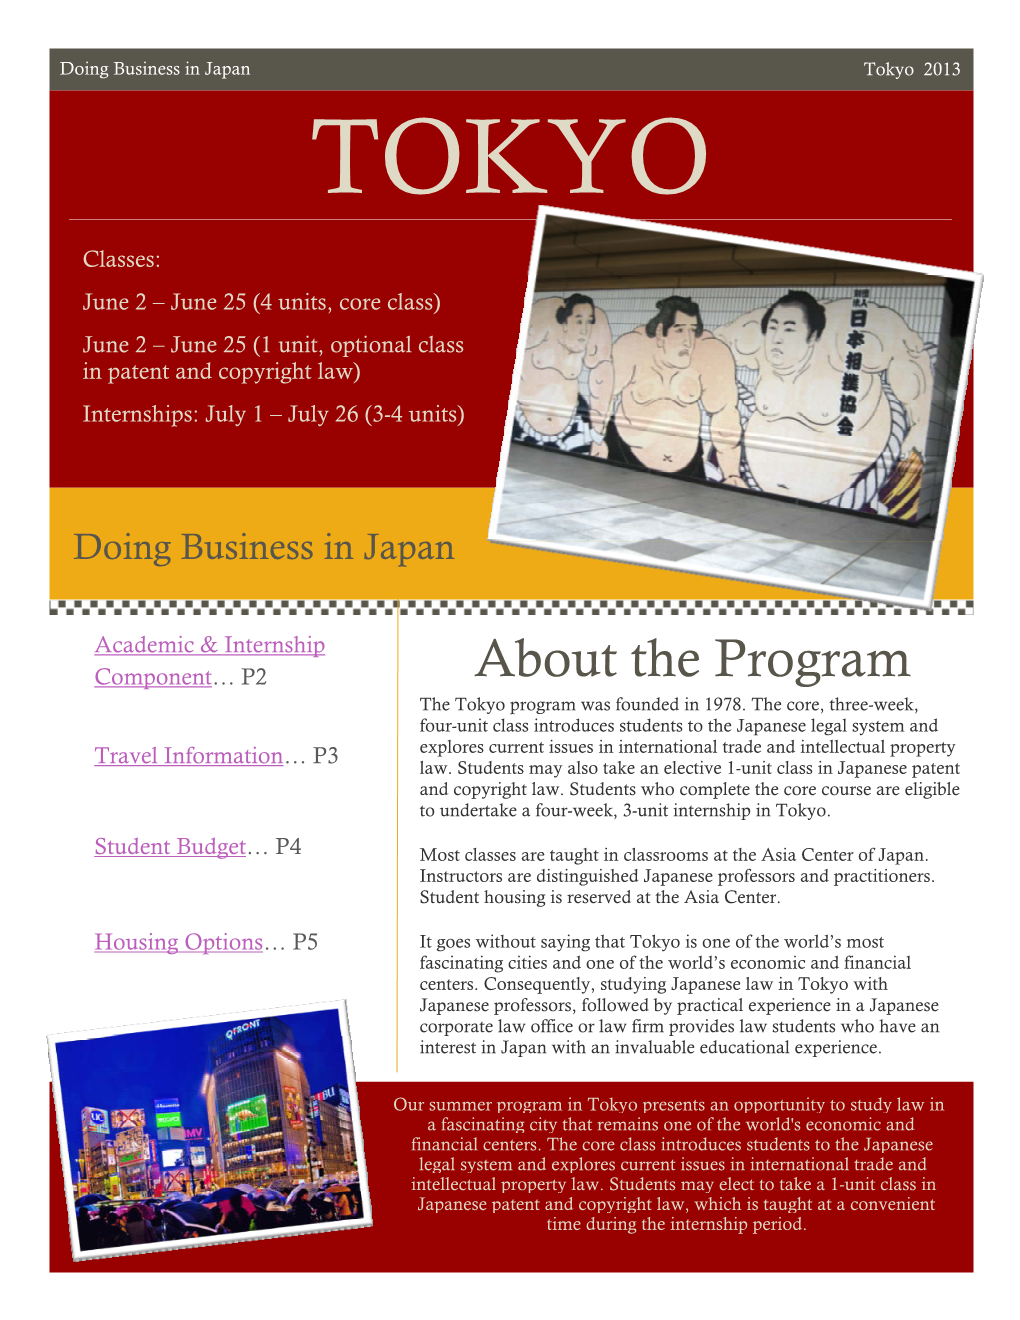 About the Program the Tokyo Program Was Founded in 1978